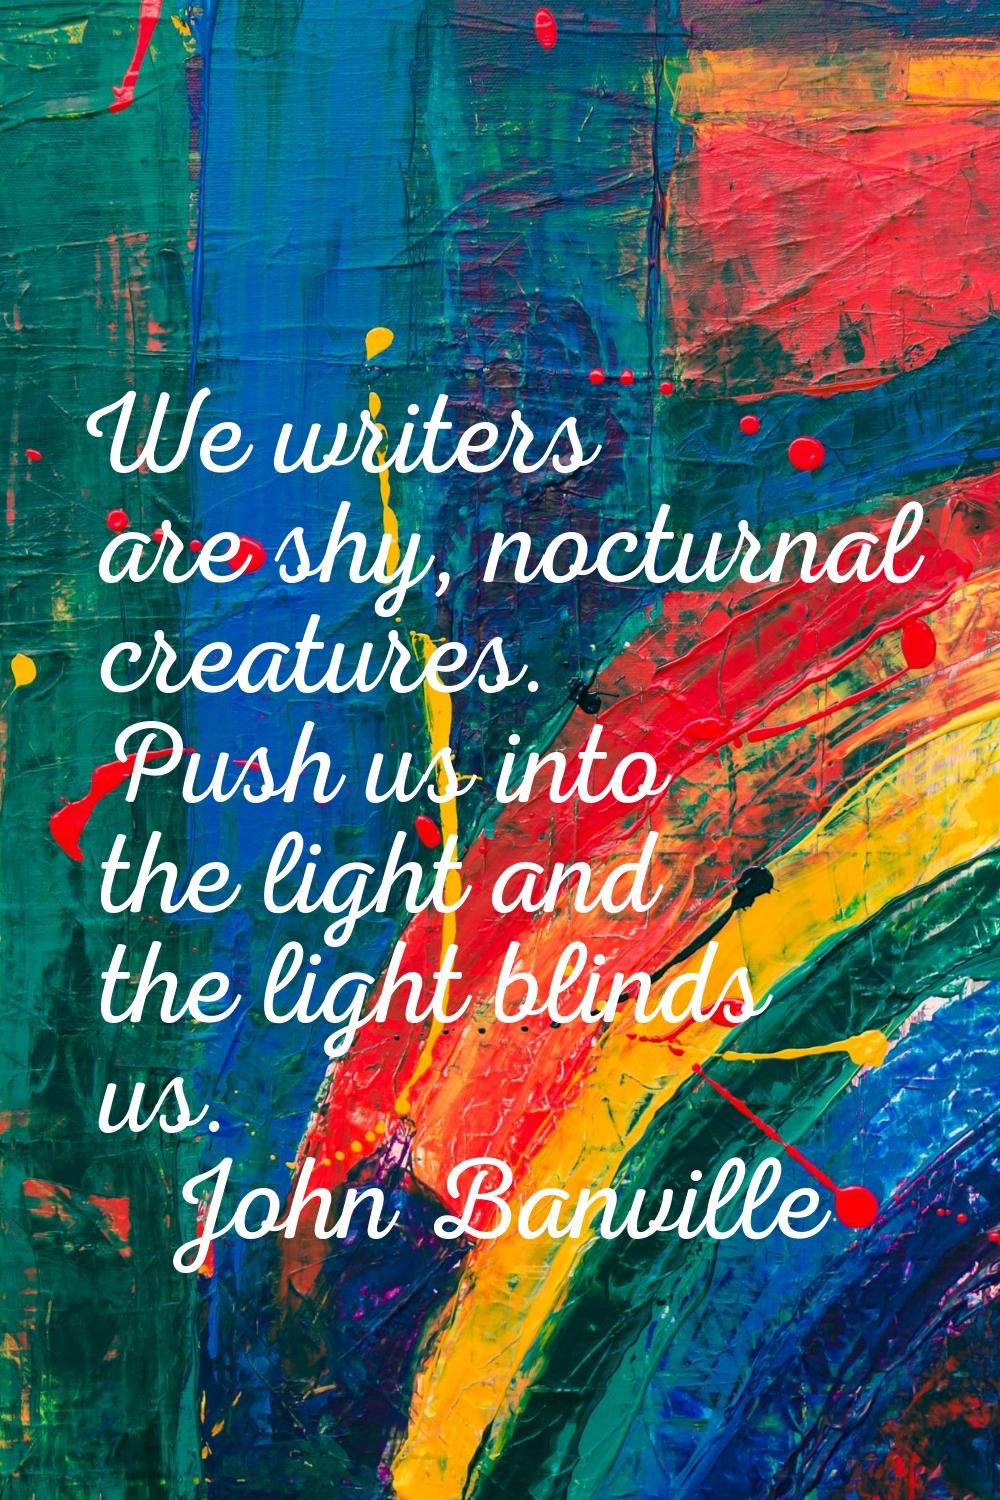 We writers are shy, nocturnal creatures. Push us into the light and the light blinds us.